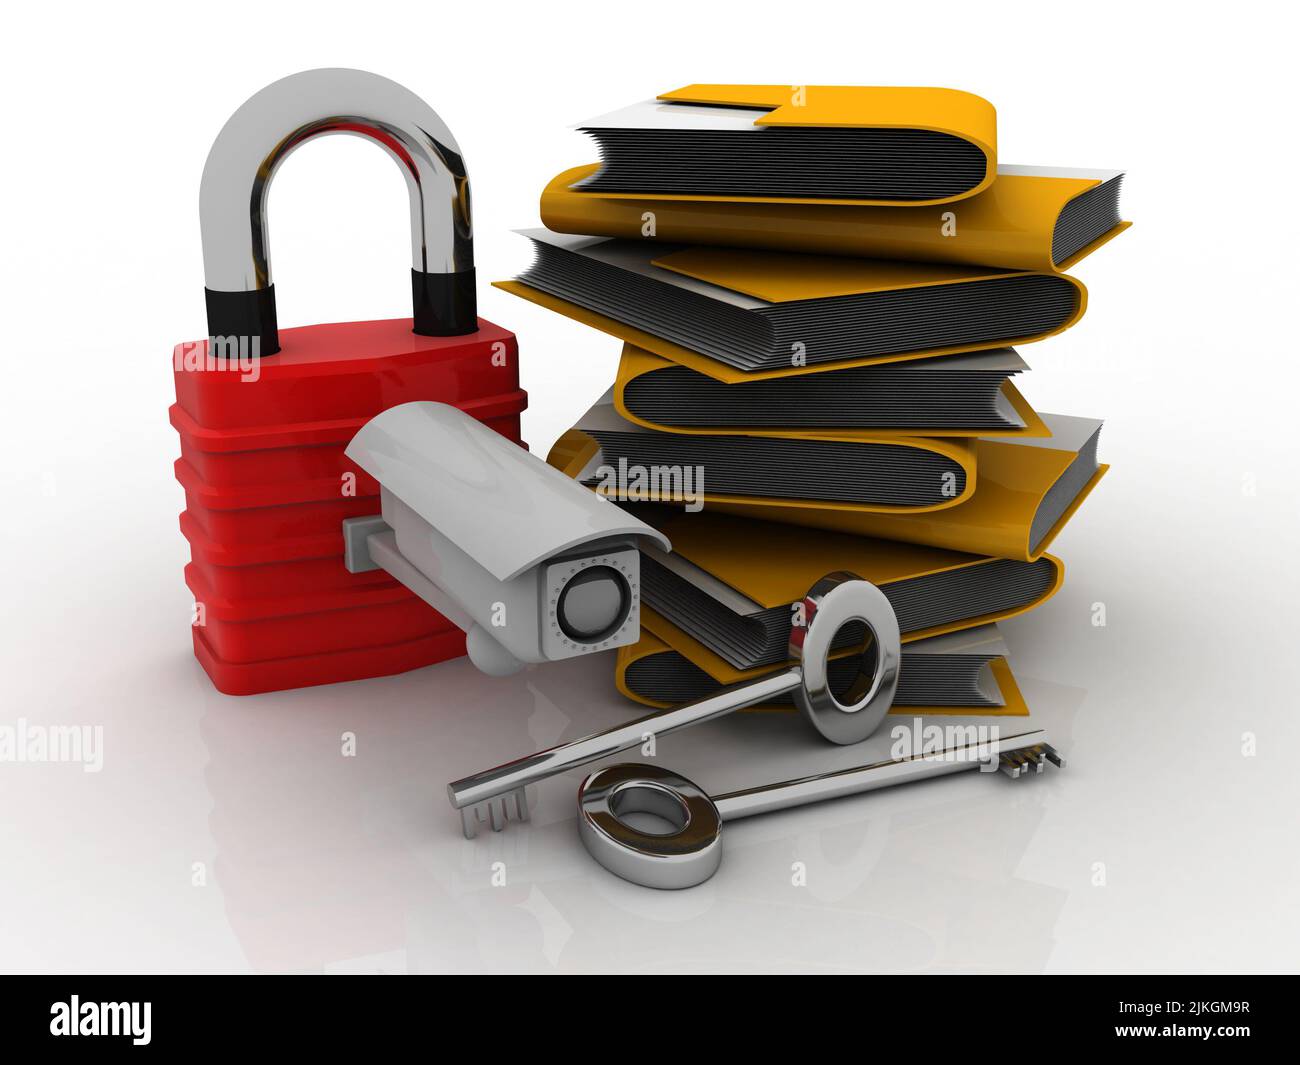 3D rendering Yellow folder and lock. Data security concept under CCTV camera Stock Photo